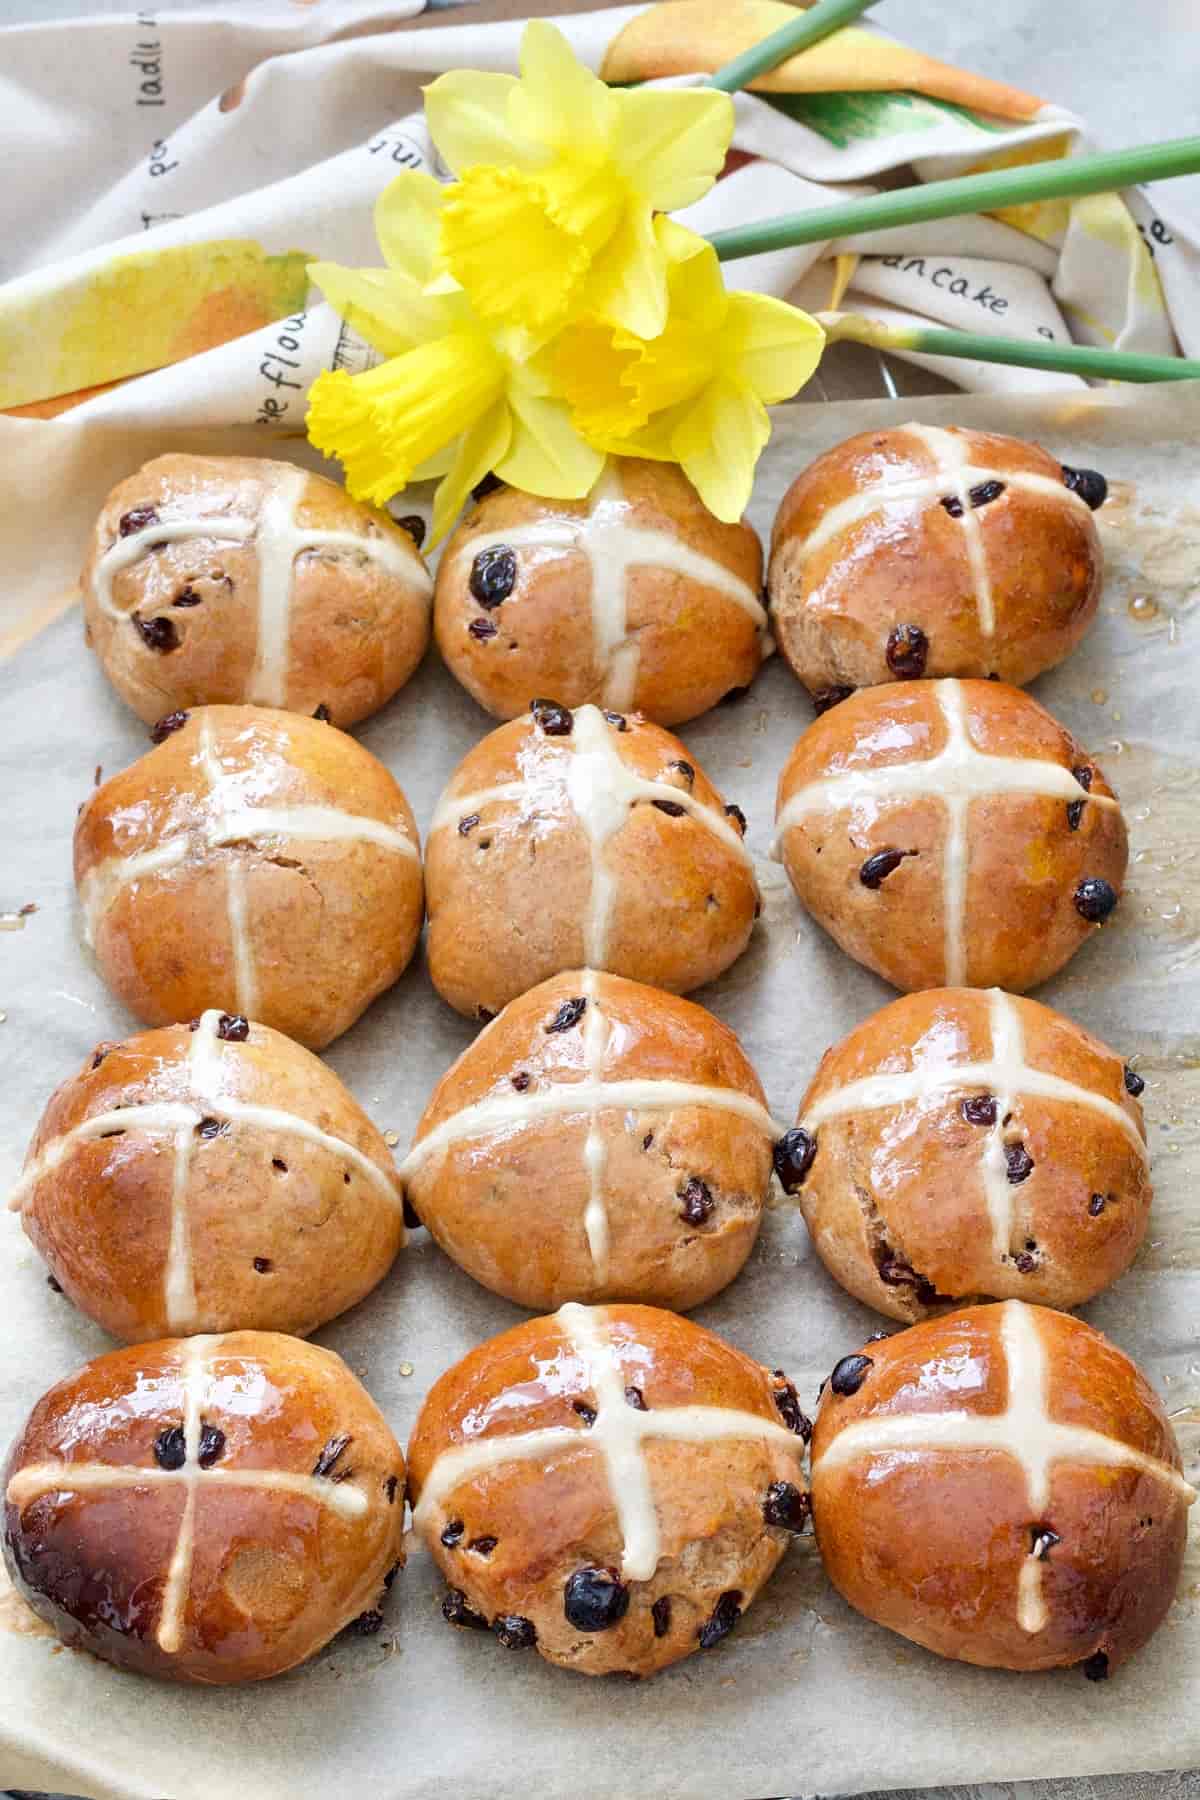 Hot cross buns with daffodils at the top.